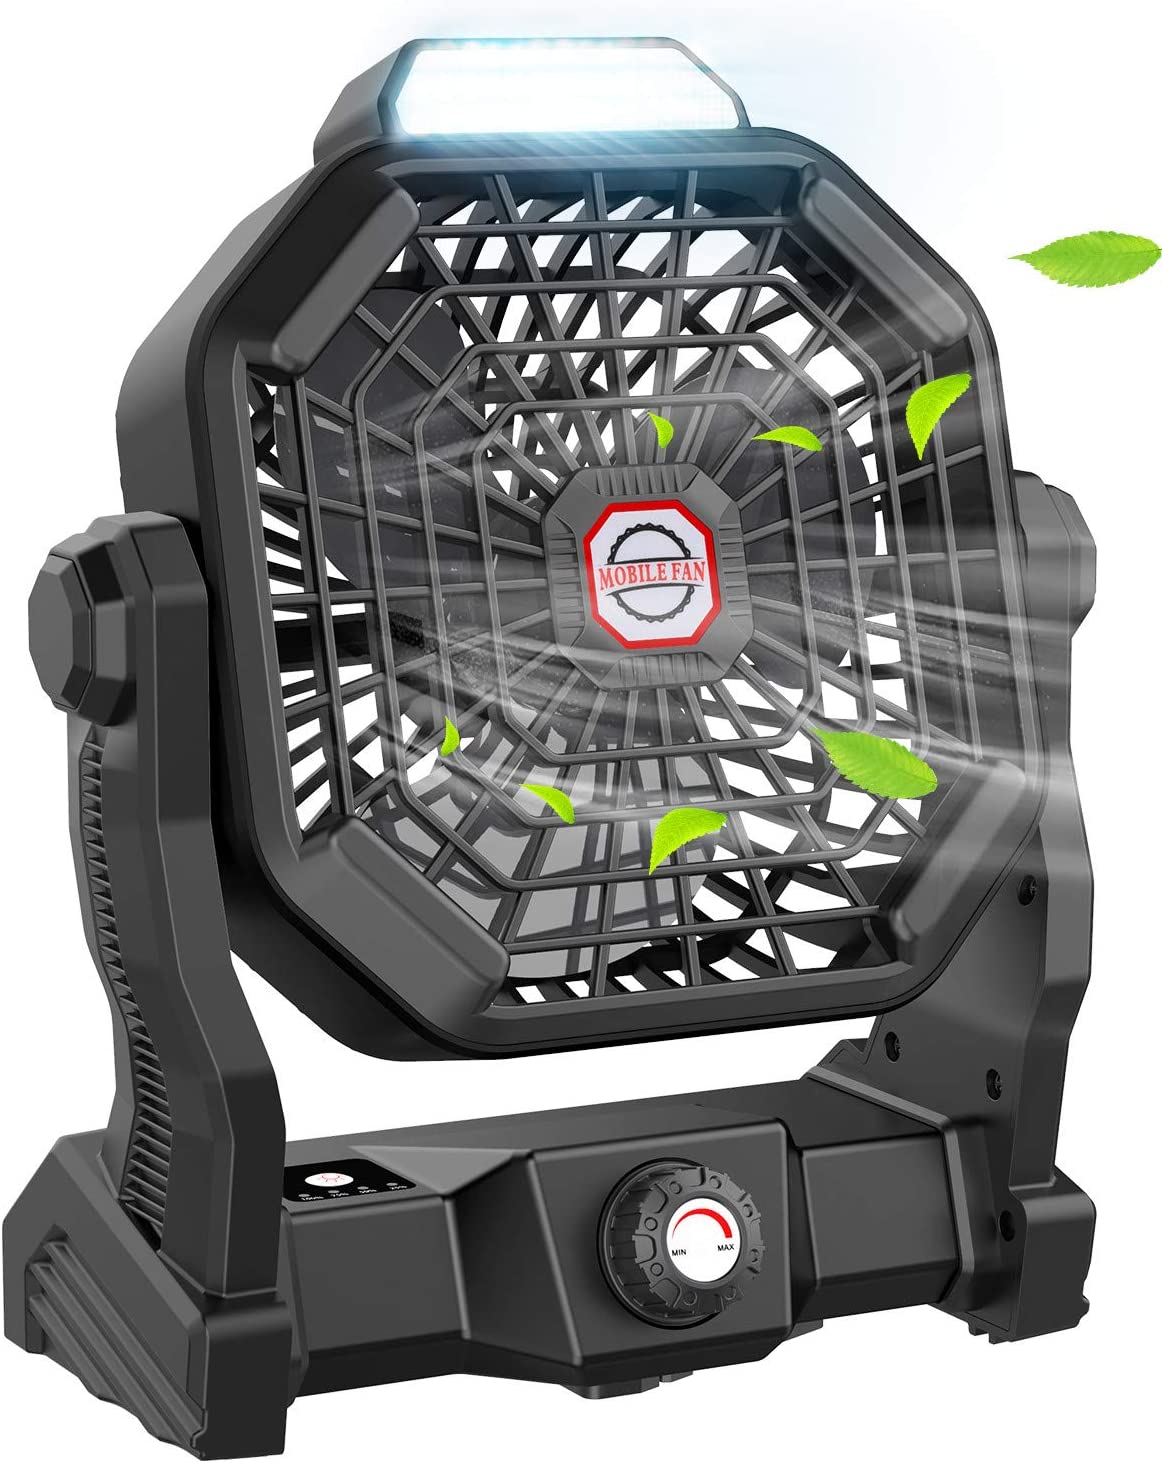 270°Degree Free Adjustable Camping Fan with LED Lantern Stepless Speed and Quiet Battery Operated USB Fan for Picnic, Barbecue, Fishing, Travel